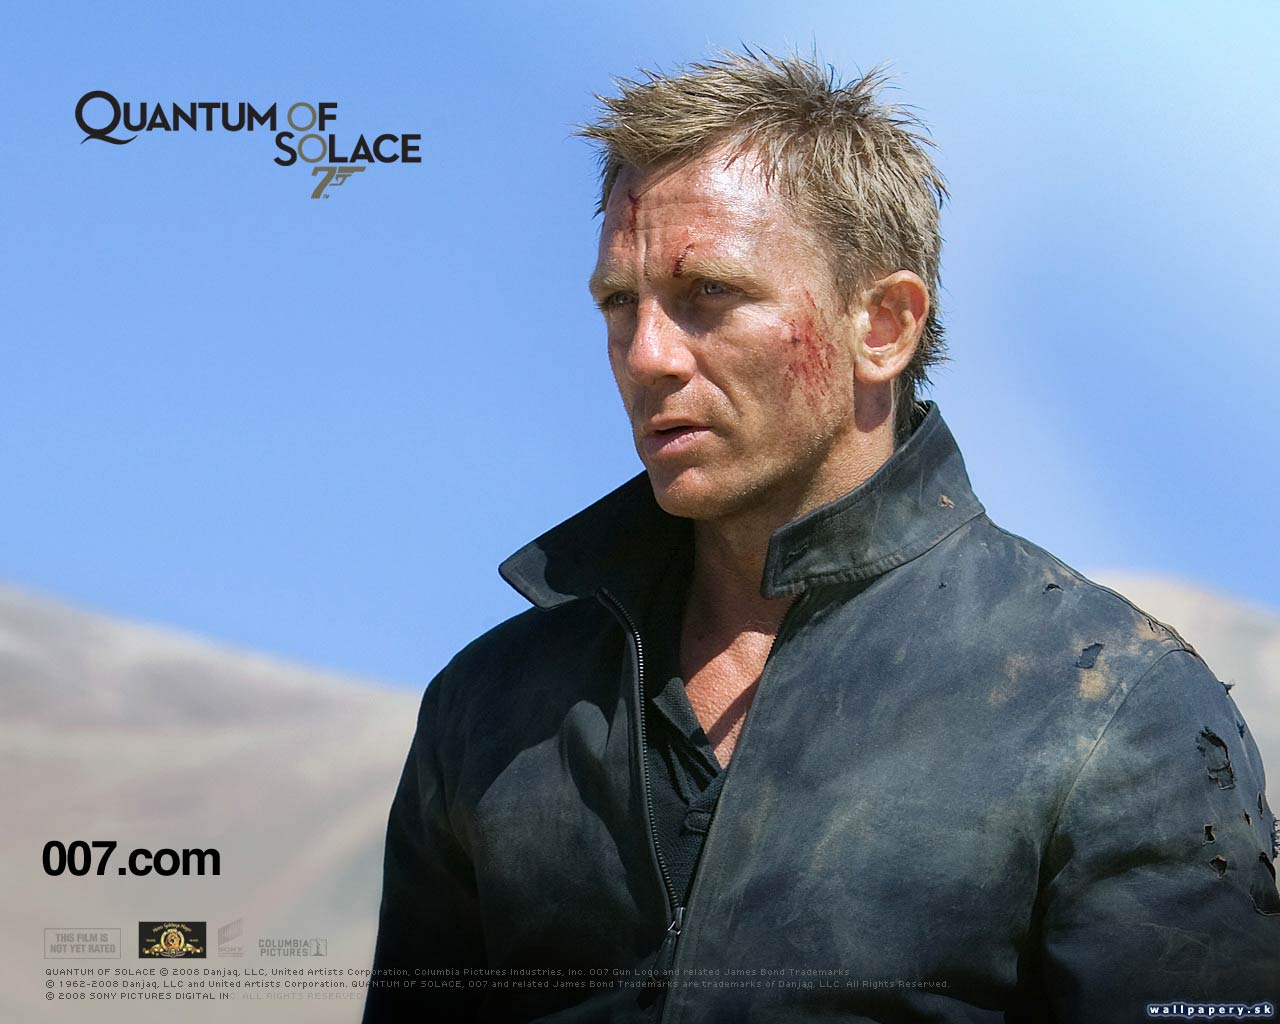 Quantum of Solace: The Game - wallpaper 2